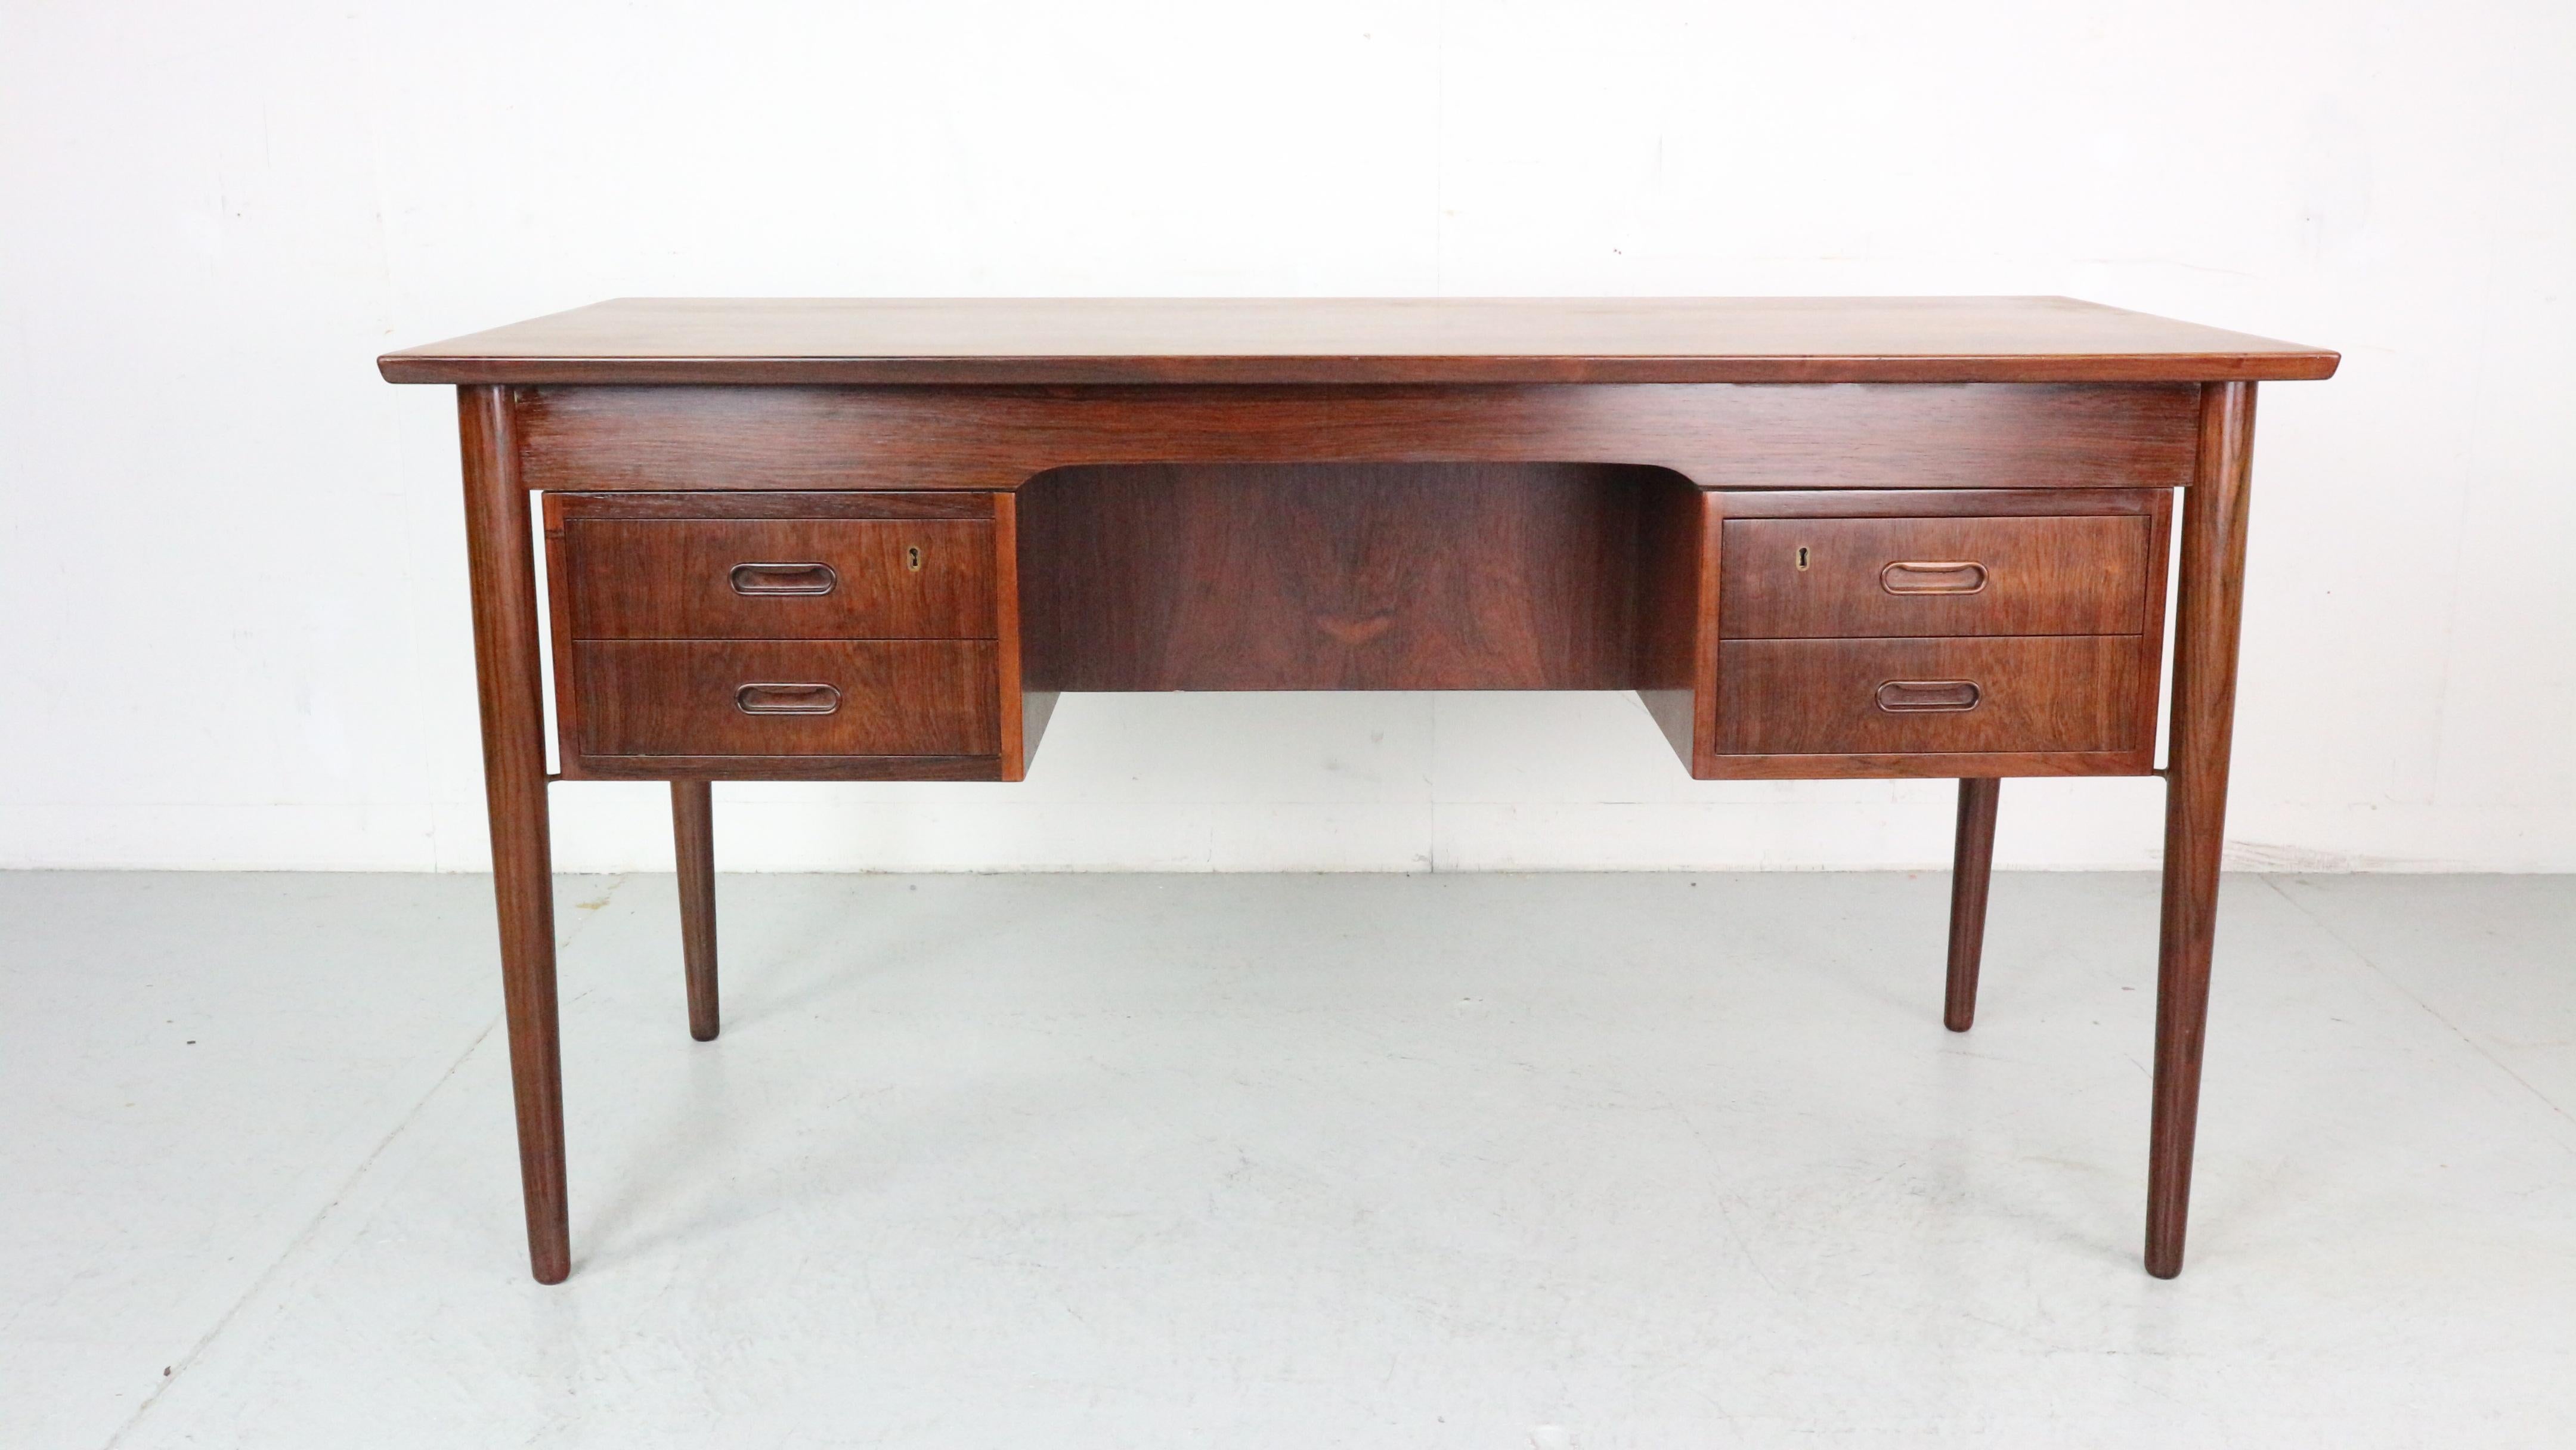 Midcentury Danish rosewood desk
A good quality Danish Teak desk having four drawers to the front and open shelf to the back. Beautiful grain on the top and drawers on original key supplied.

No shipping outside of europe